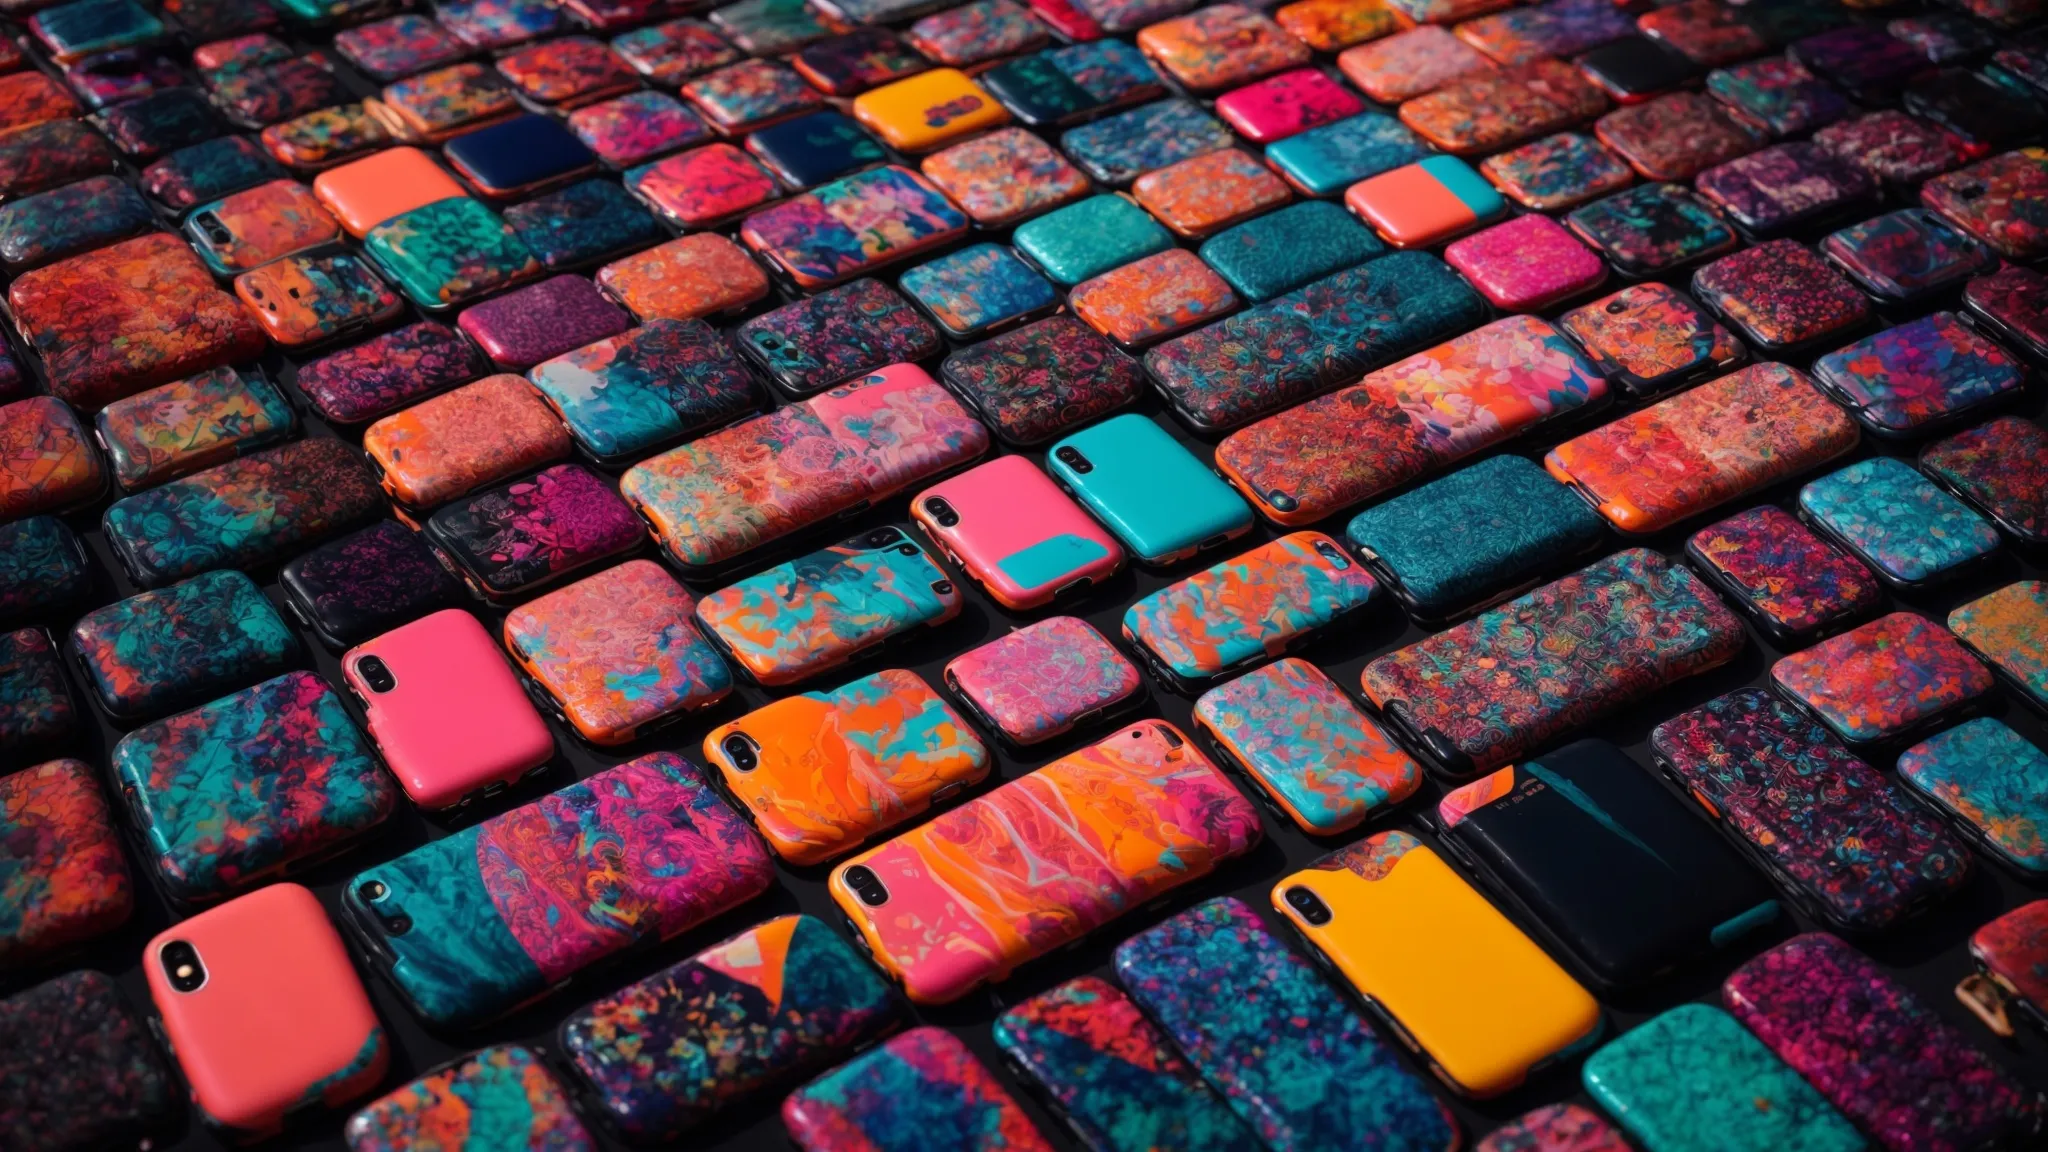 a vibrant collection of phone cases displayed in an array, showcasing a mix of contemporary art, abstract patterns, and pops of neon colors.